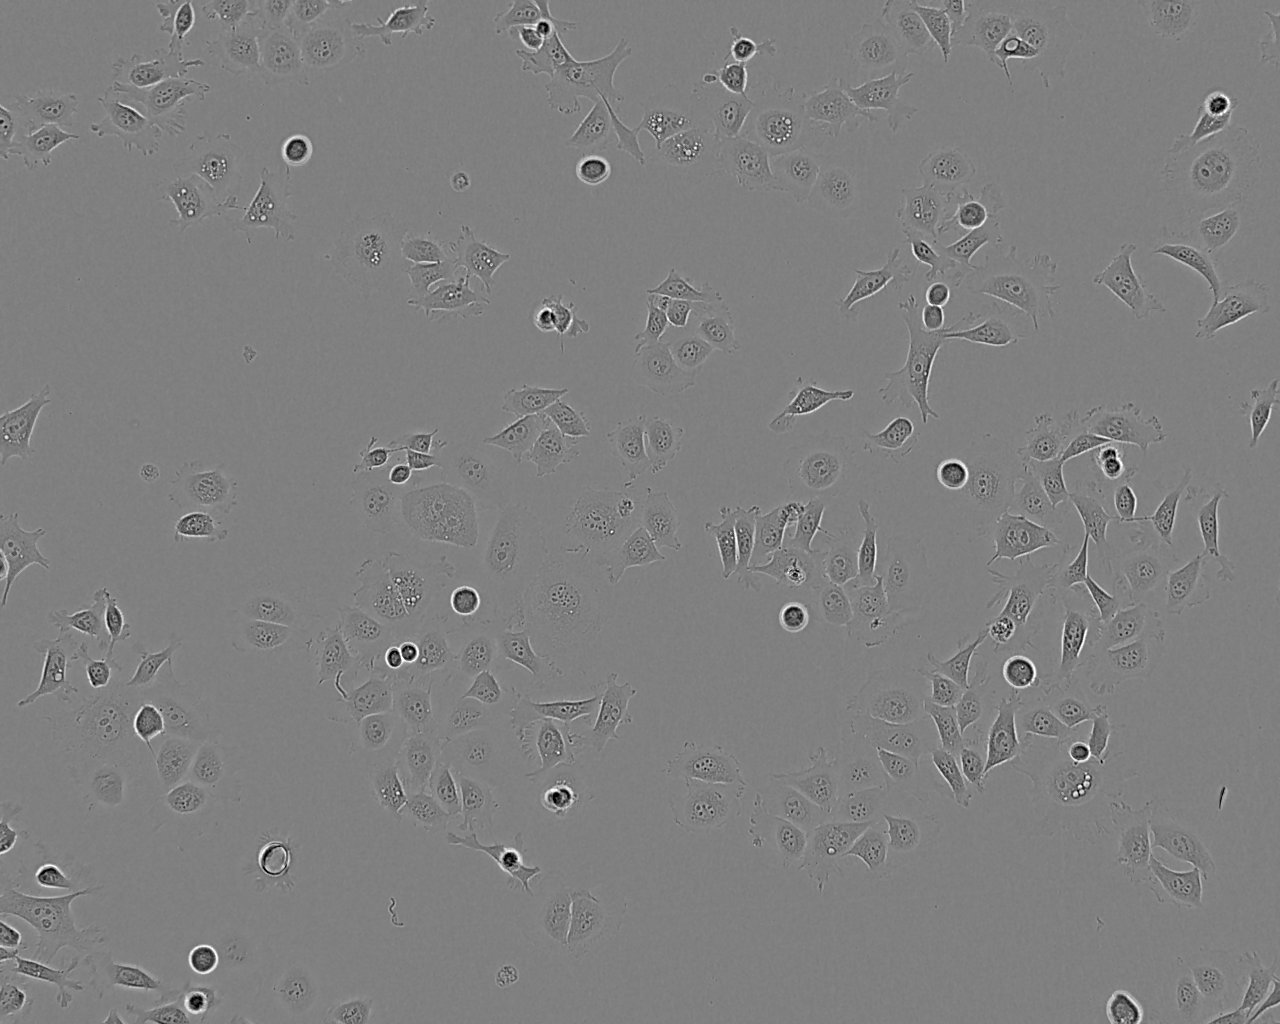 COLO 394 epithelioid cells人结肠癌细胞系,COLO 394 epithelioid cells